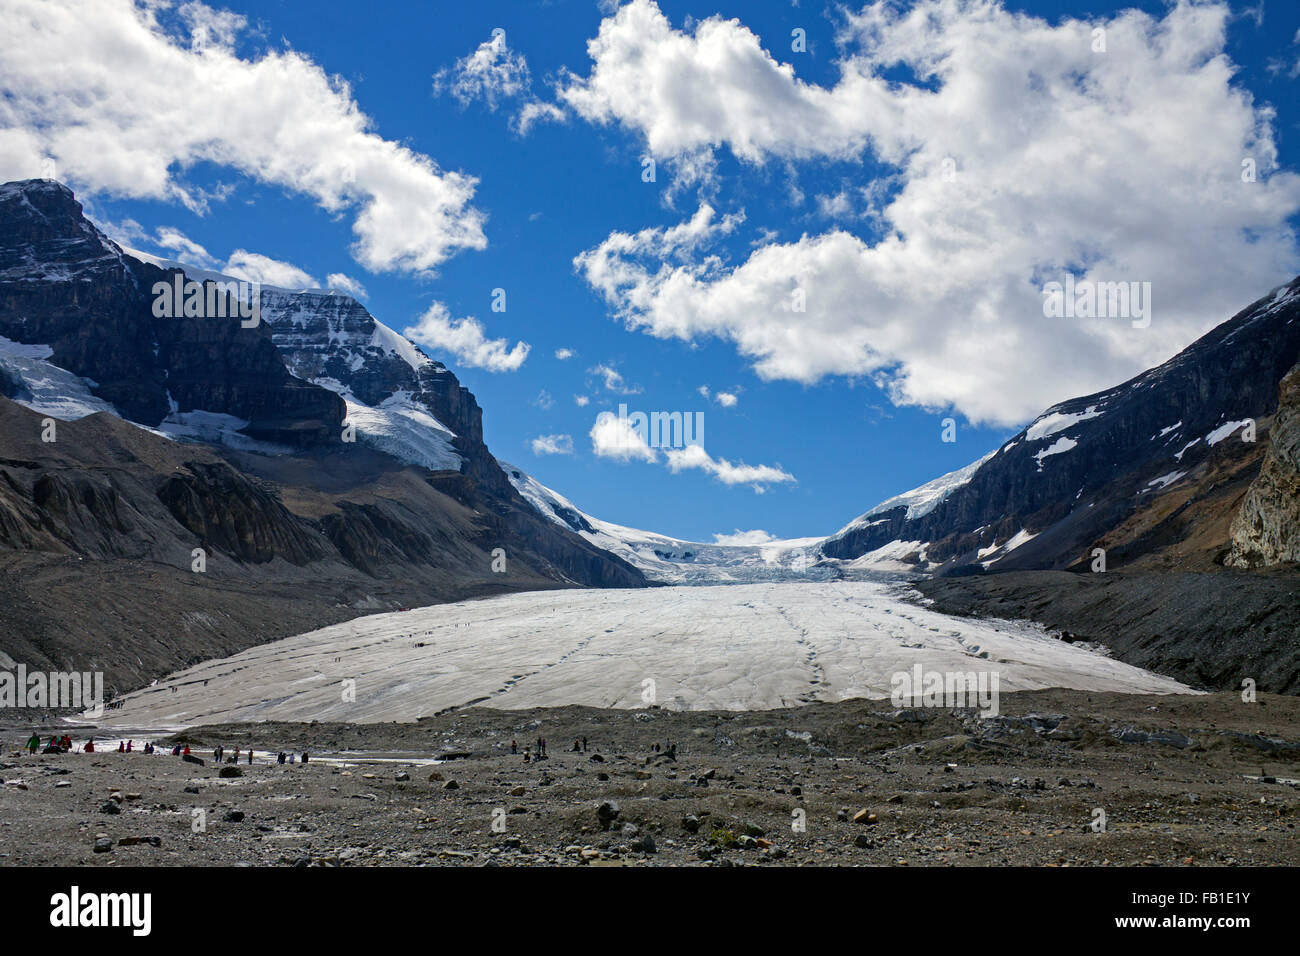 Tourists visiting receding Athabasca Glacier, part of the Columbia Icefield in the Canadian Rockies, Jasper NP, Alberta, Canada Stock Photo